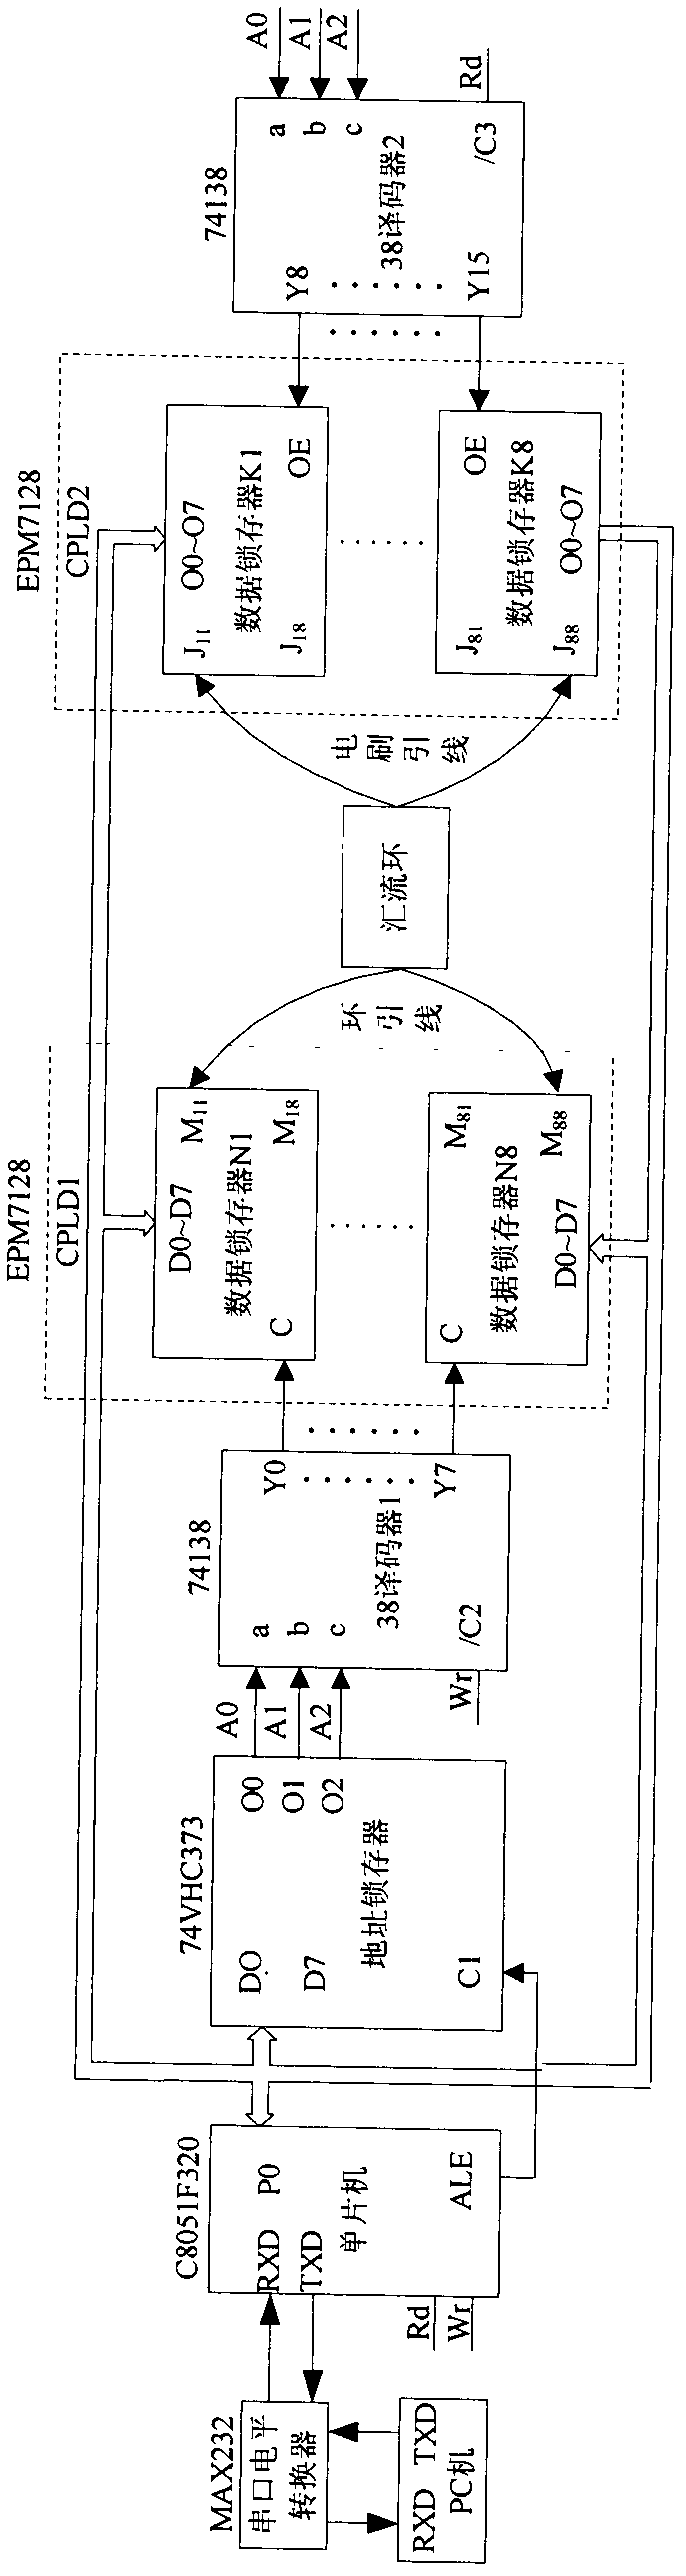 On-off automatic detection device for loops of collector ring